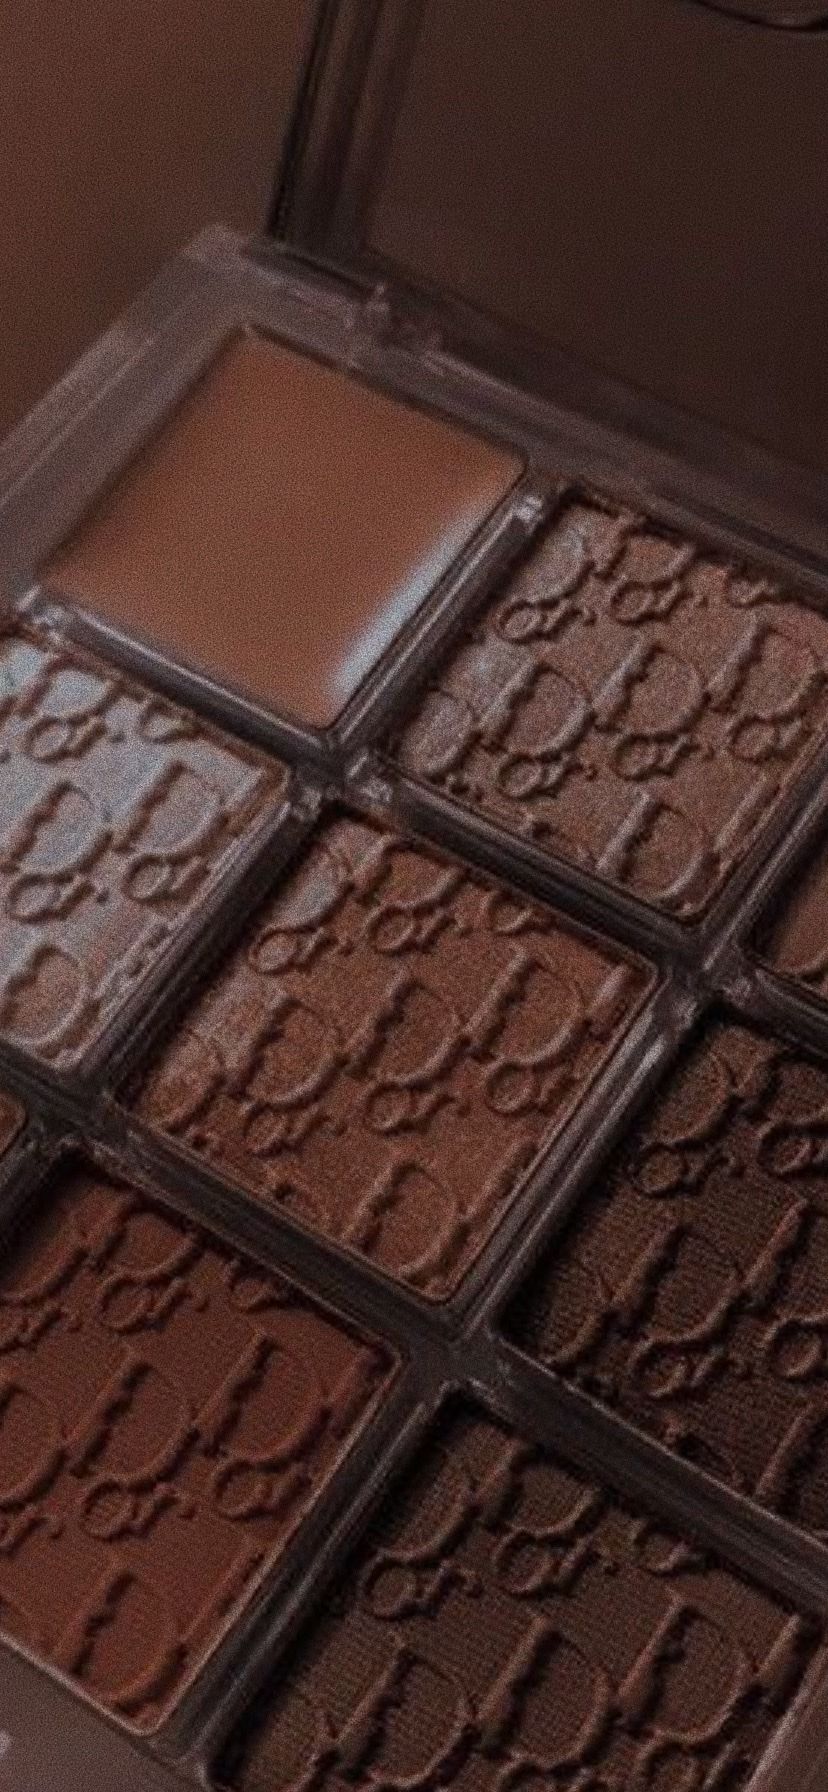 A close up of a palette of chocolate brown eyeshadow - Chocolate